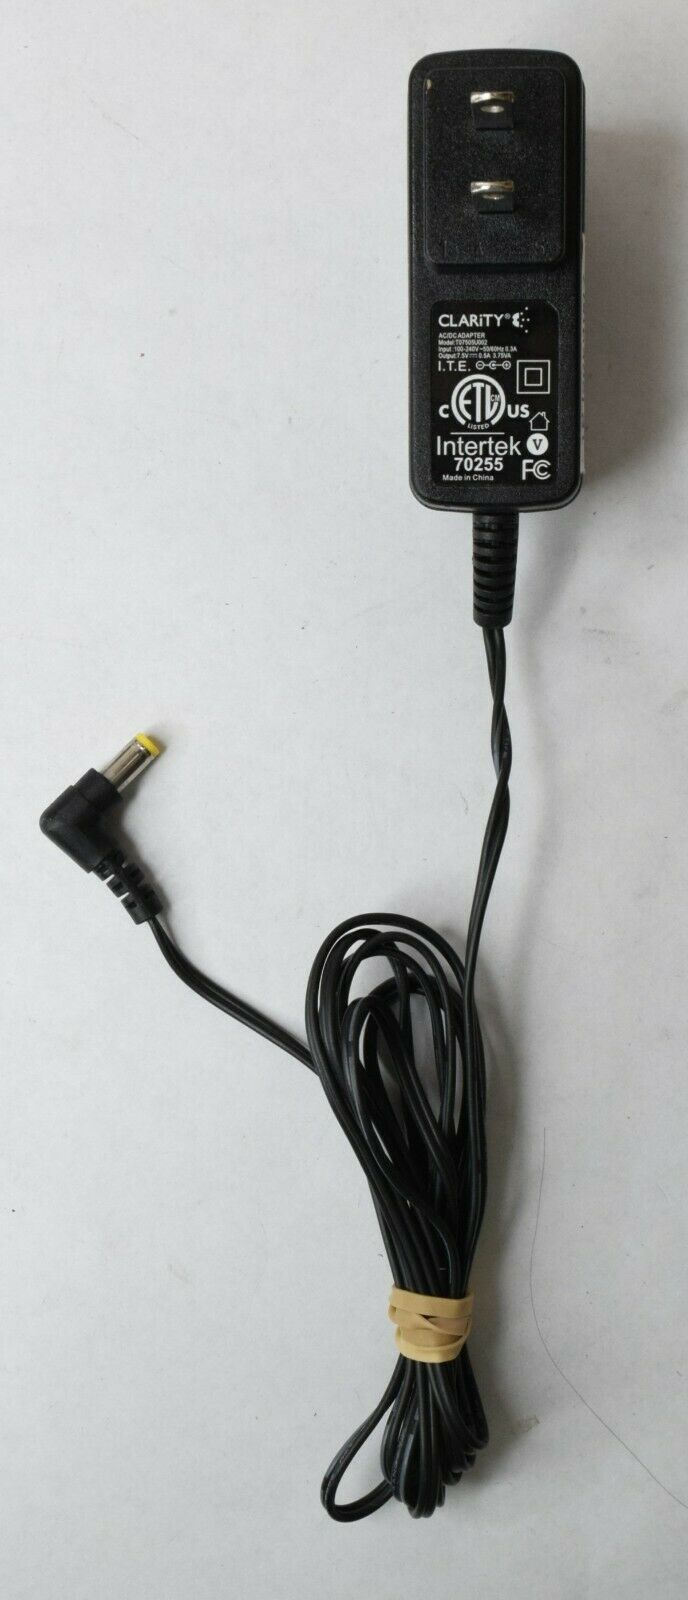 Clarity Power Supply Adapter Unit T075-5U002 7.5V 0.5A Type: Adapter Output Voltage: 7.5 V Features: Powered Brand: Cl - Click Image to Close